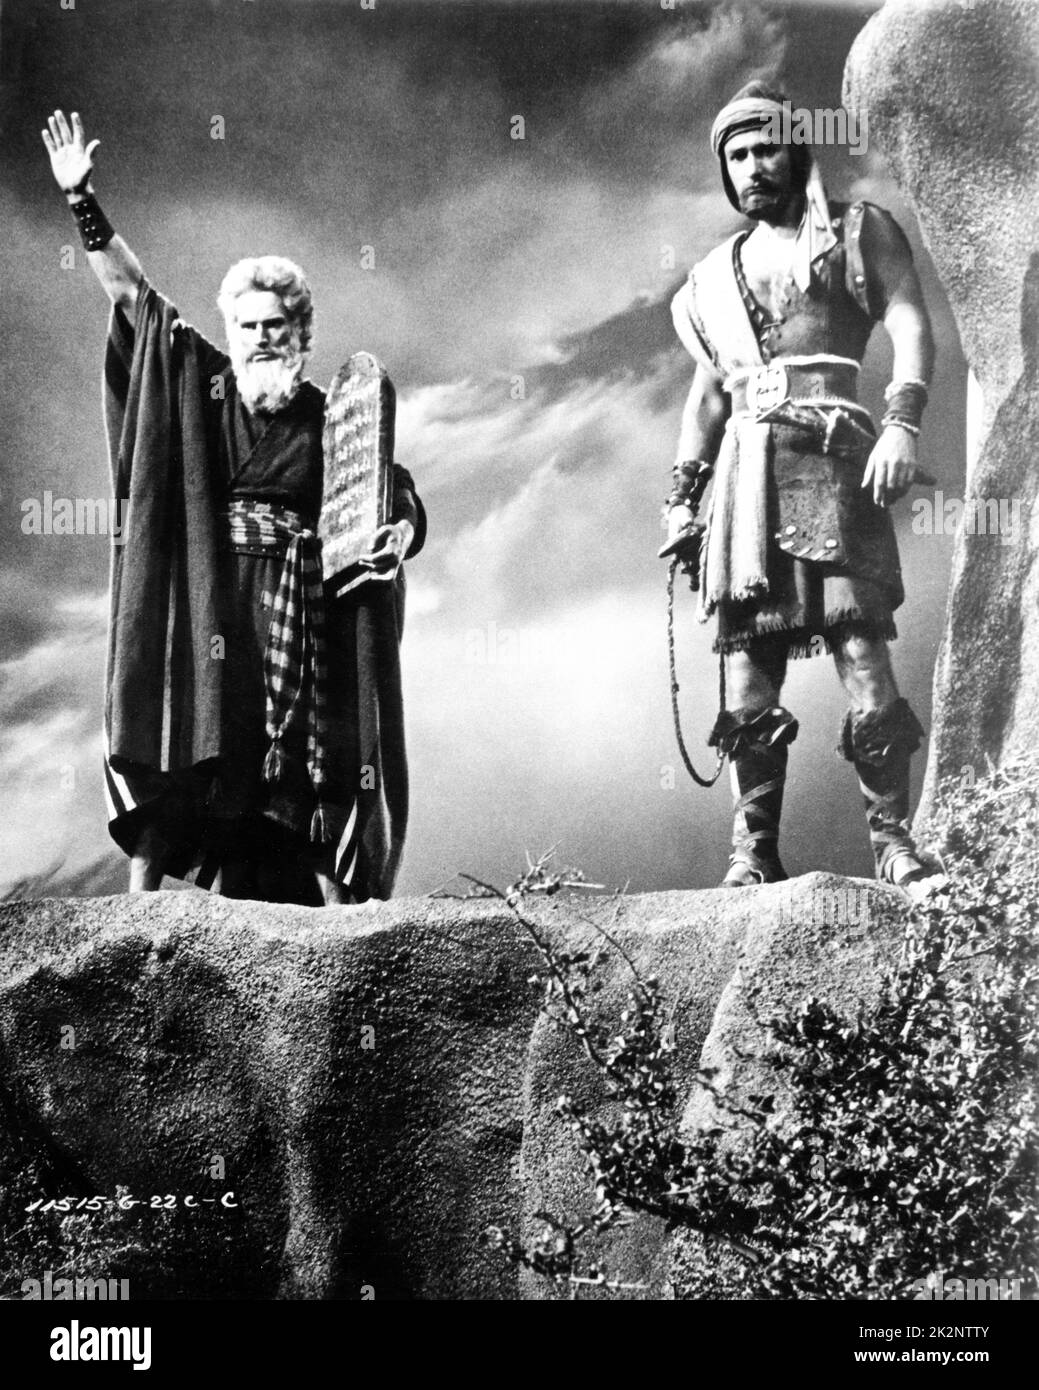 CHARLTON HESTON and JOHN DEREK in THE TEN COMMANDMENTS 1956 director CECIL B. DeMILLE Motion Pictures Associates / Paramount Pictures Stock Photo